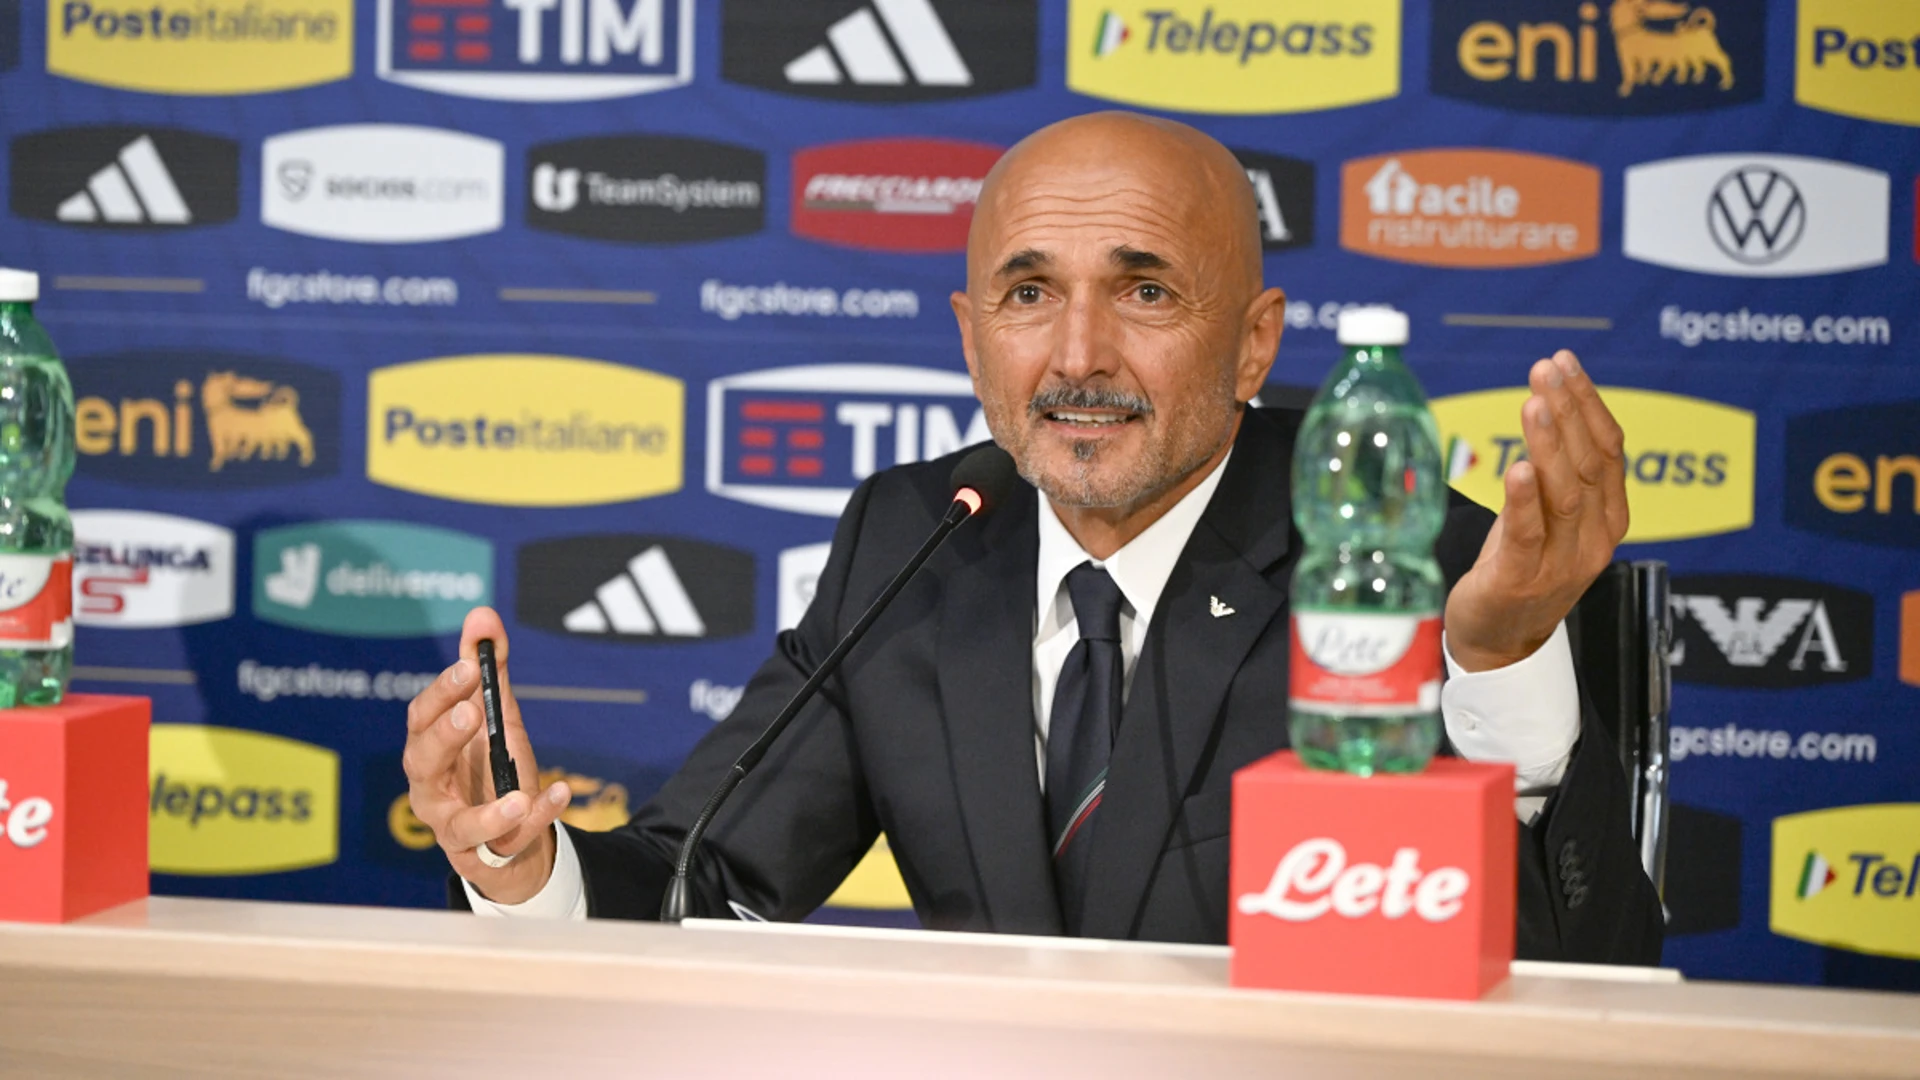 Italy 'too comfortable' in Albania win, says Spalletti